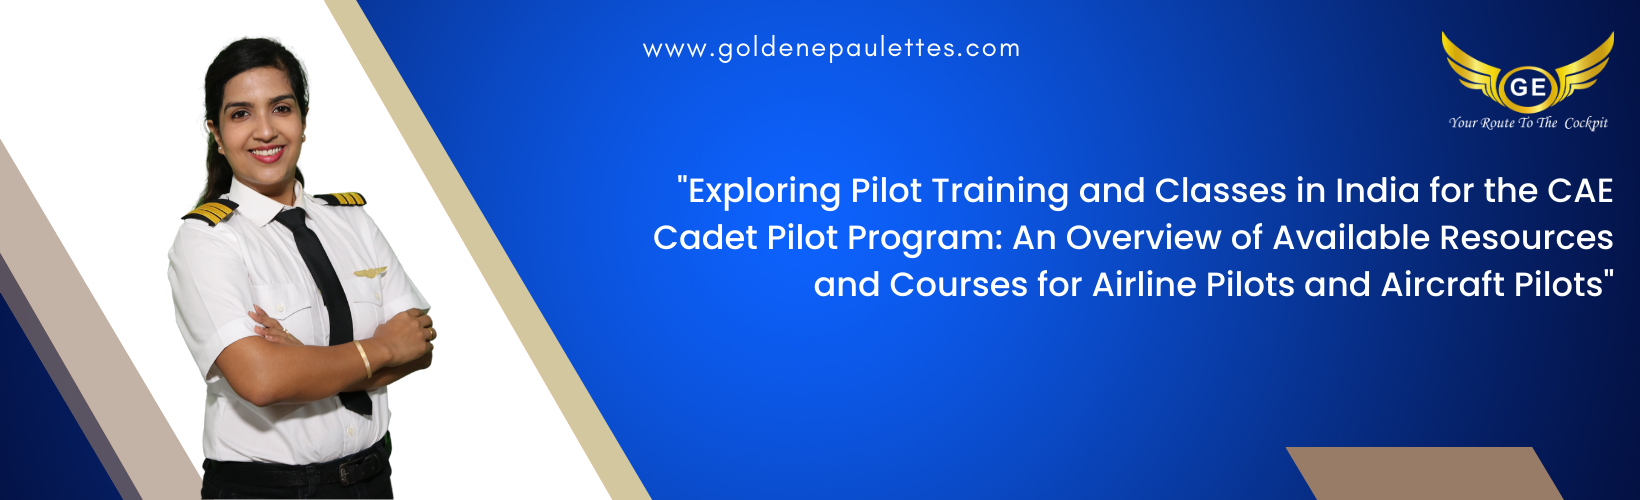 Classes and Training in India for the CAE Cadet Pilot Program